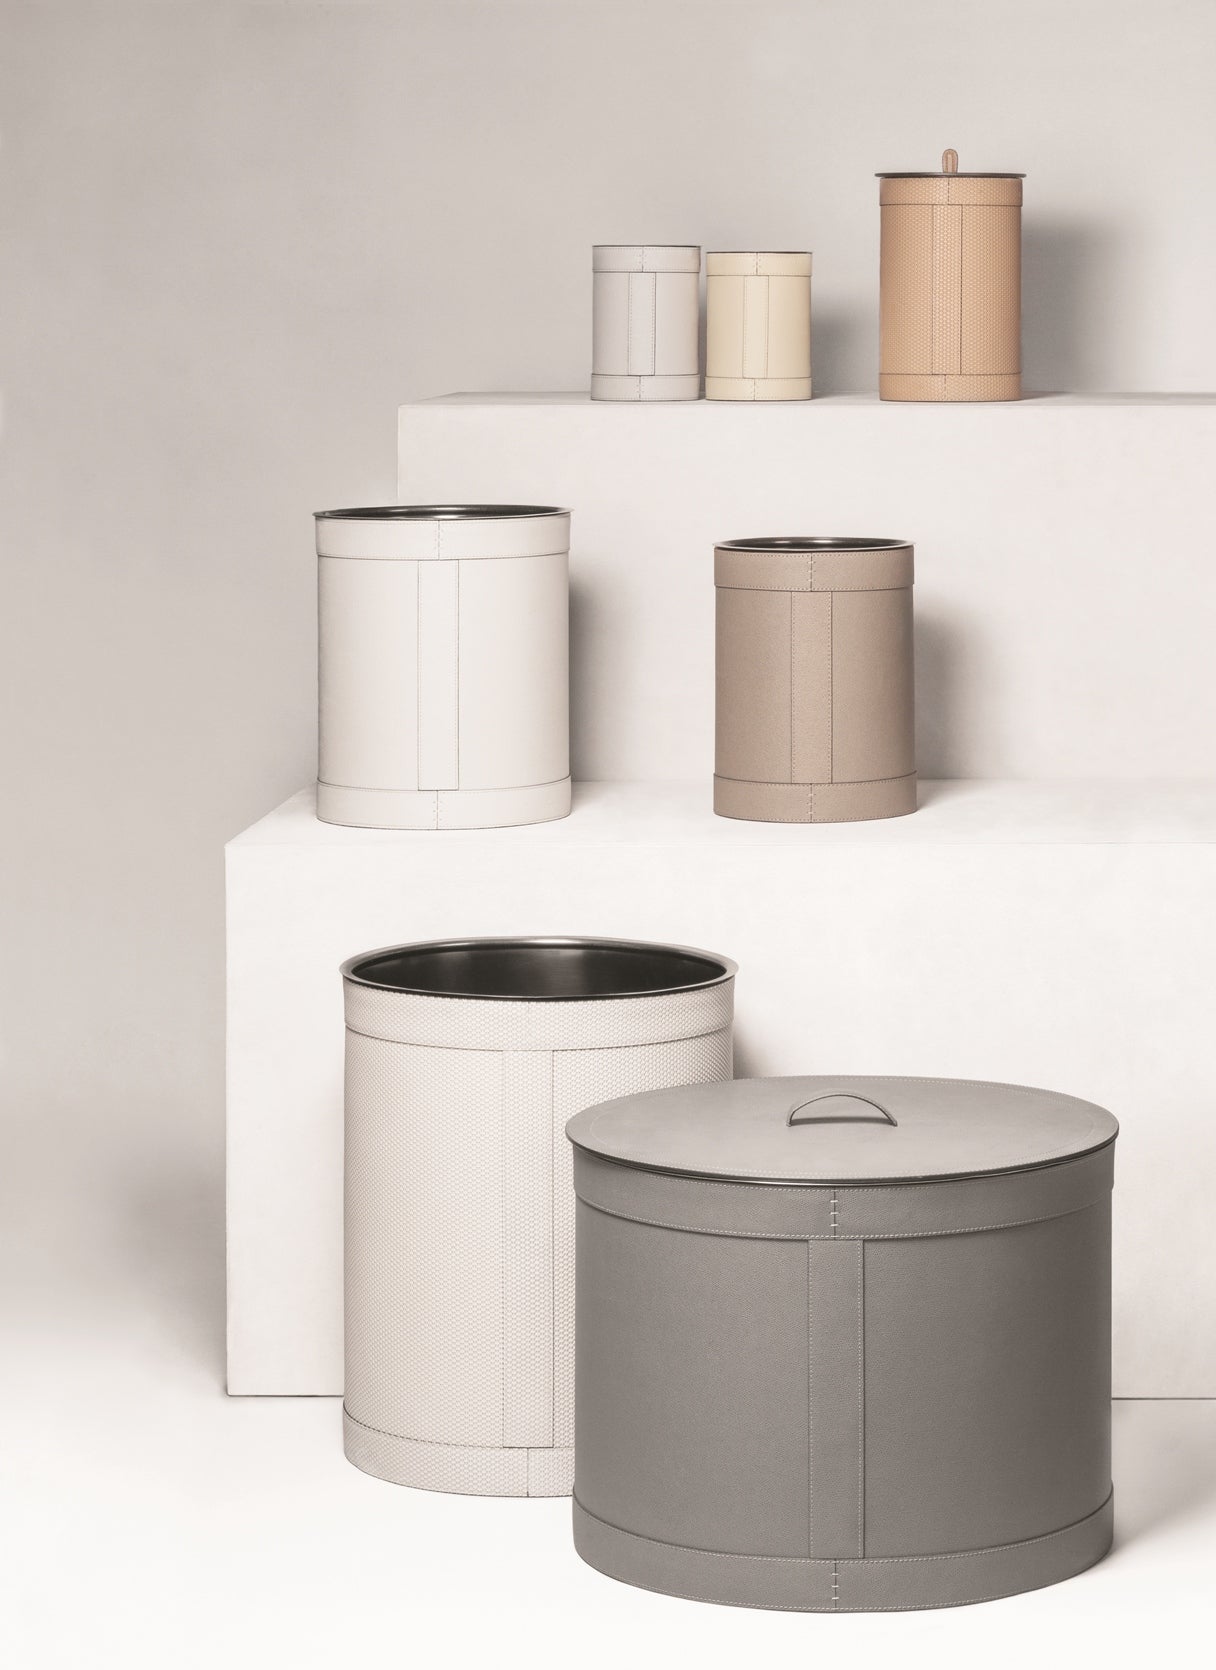 Giobagnara Brus Leather-Covered Bin With Removable Metal Container | Sleek design with a leather-covered exterior | Features a removable metal container for easy cleaning | Explore premium lifestyle accessories at 2Jour Concierge, #1 luxury high-end gift & lifestyle shop